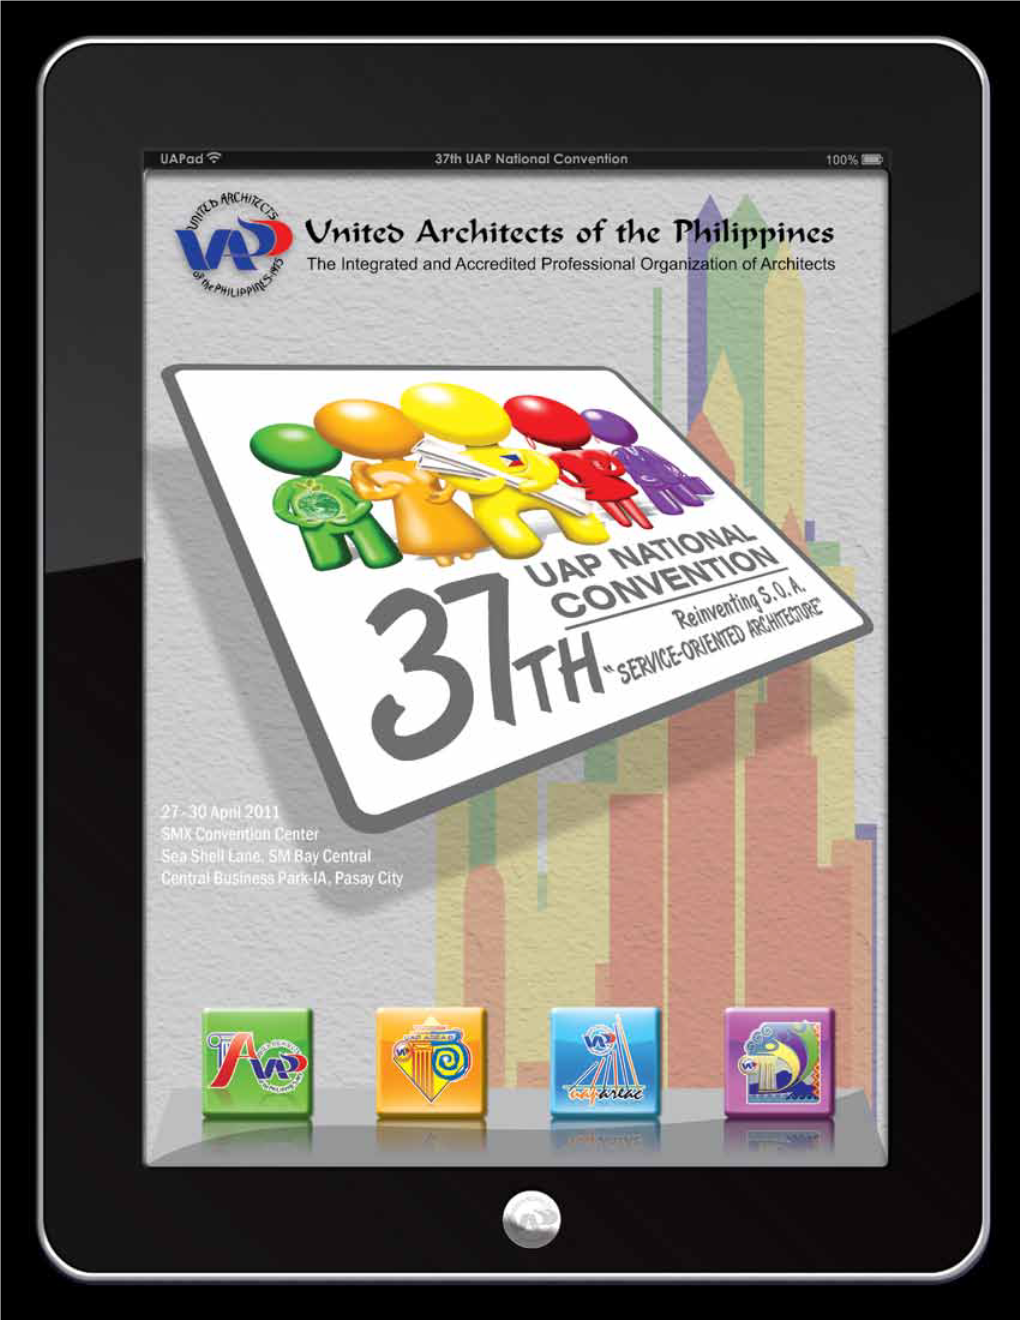 37Th UAP National Convention